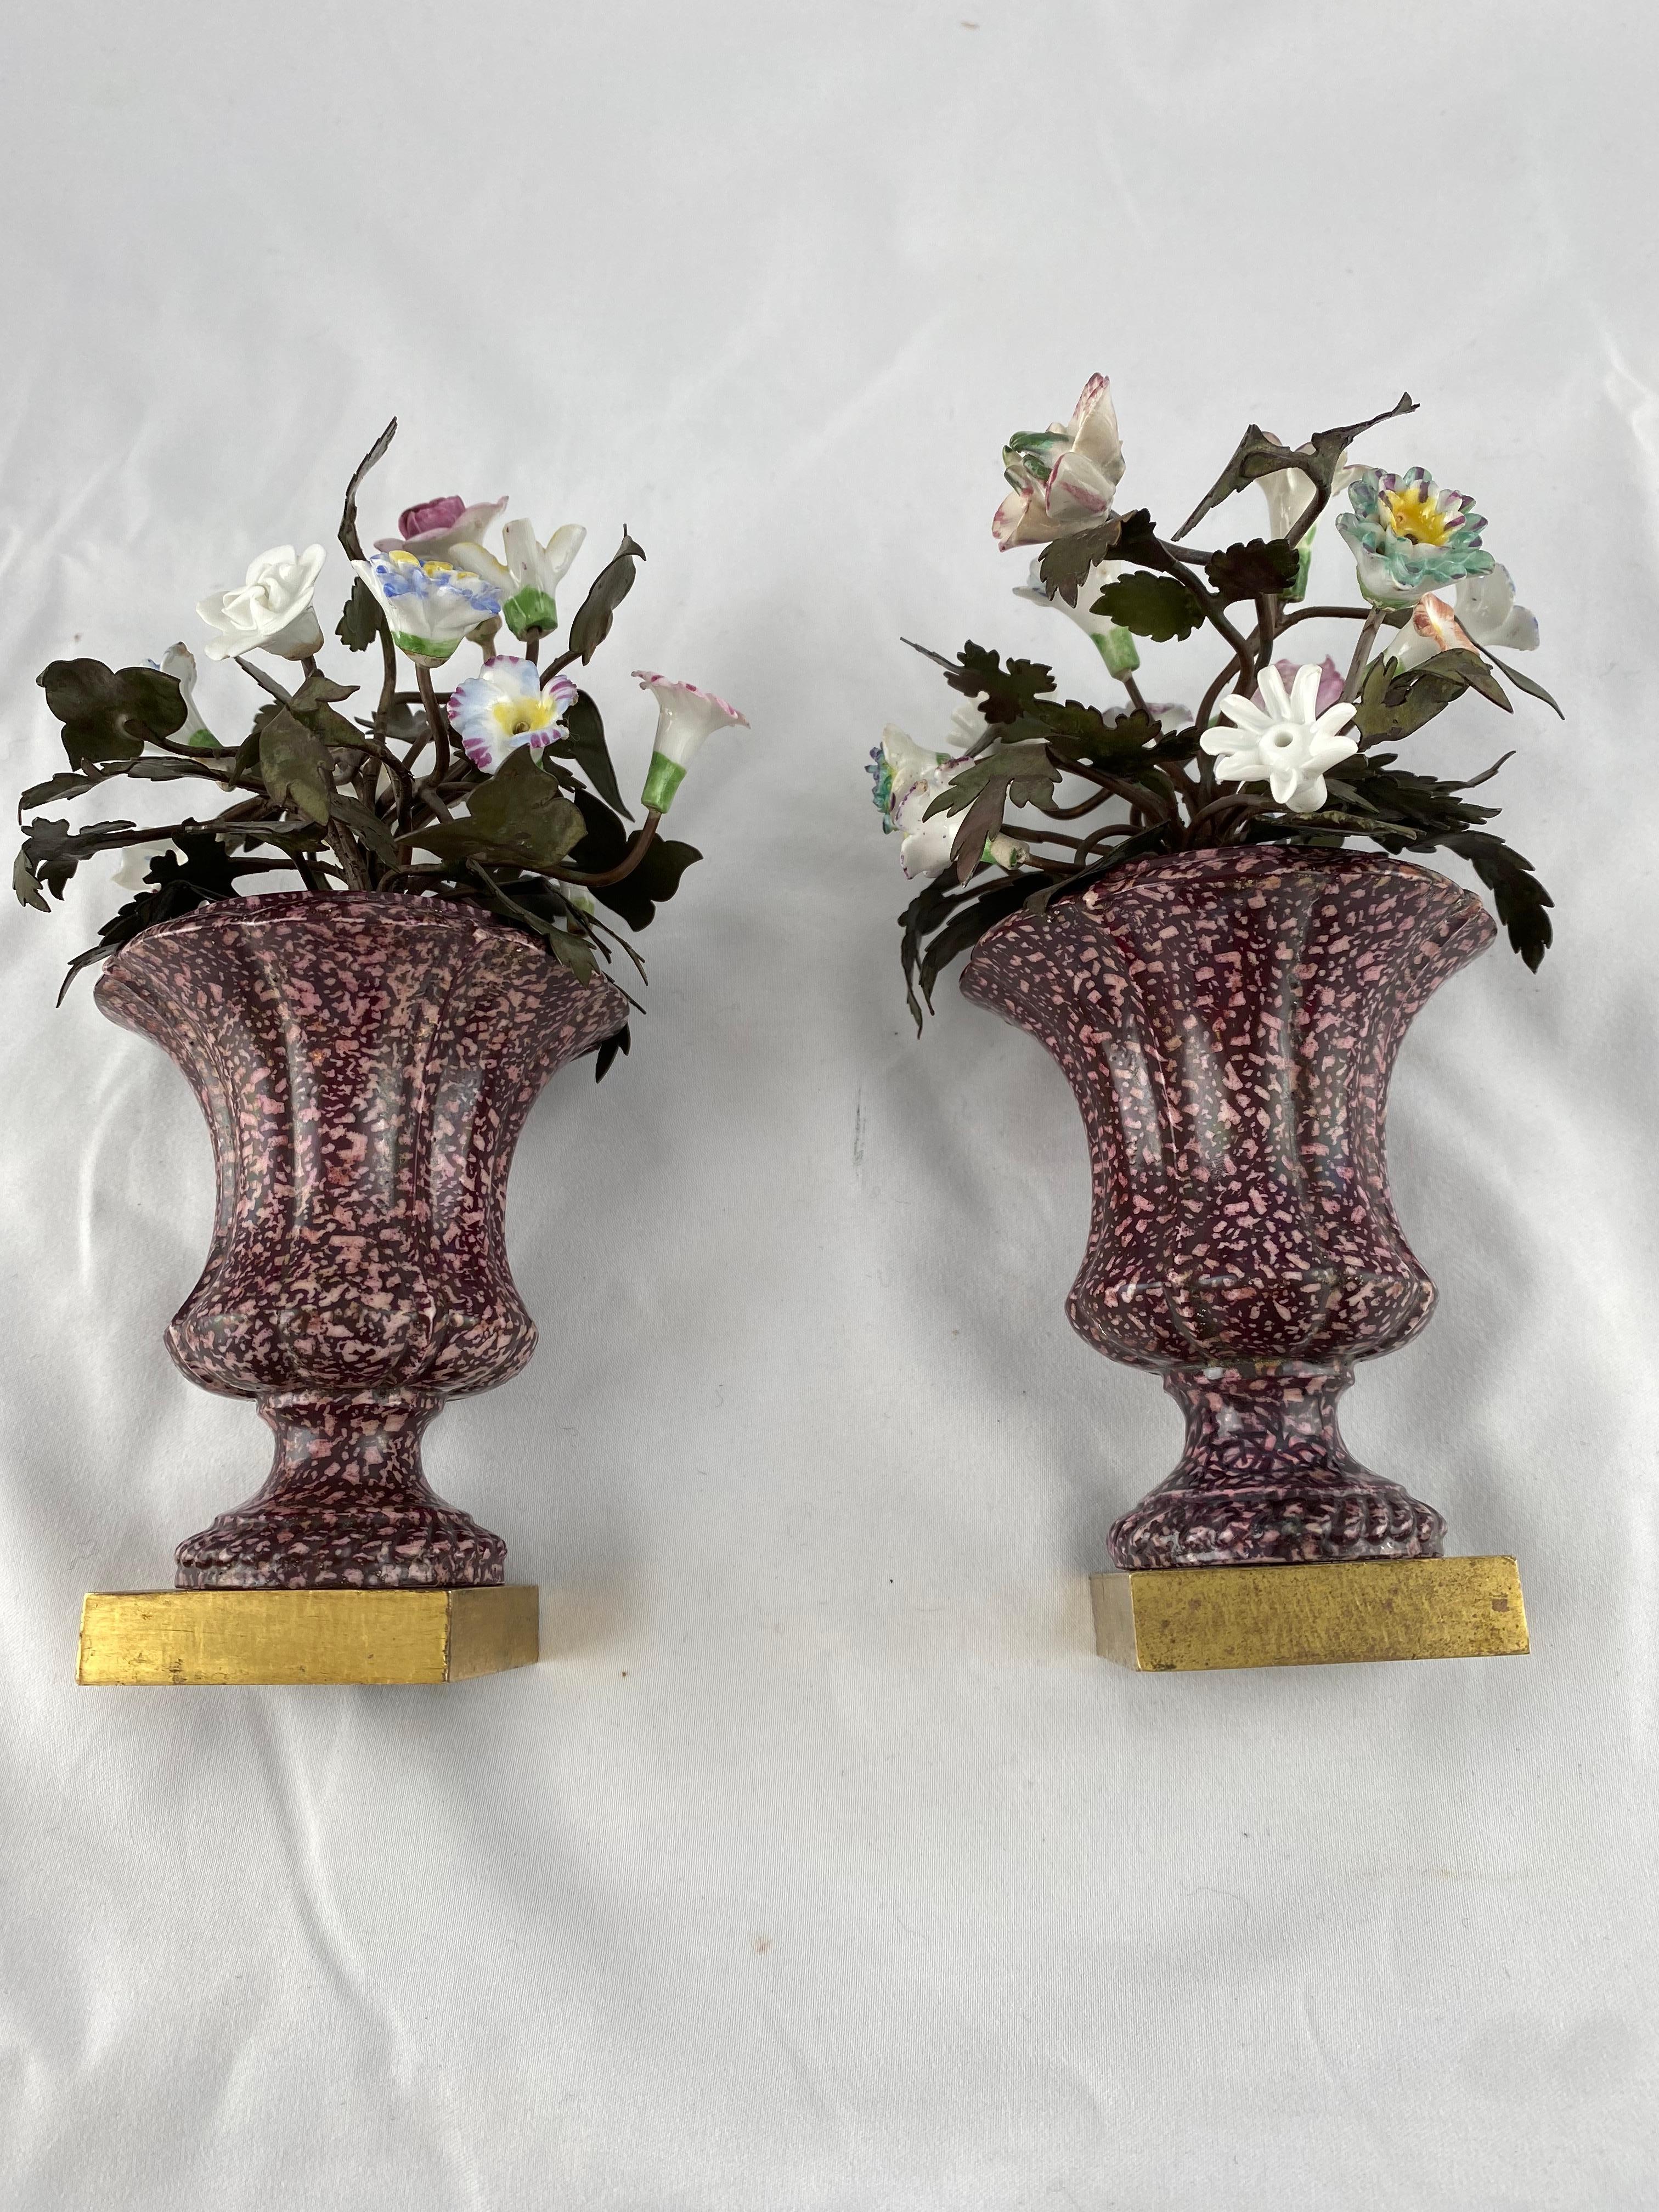 Bronze Pair of Porcelain Vases with Porcelain Flowers and Leafs of Metal, 19th C